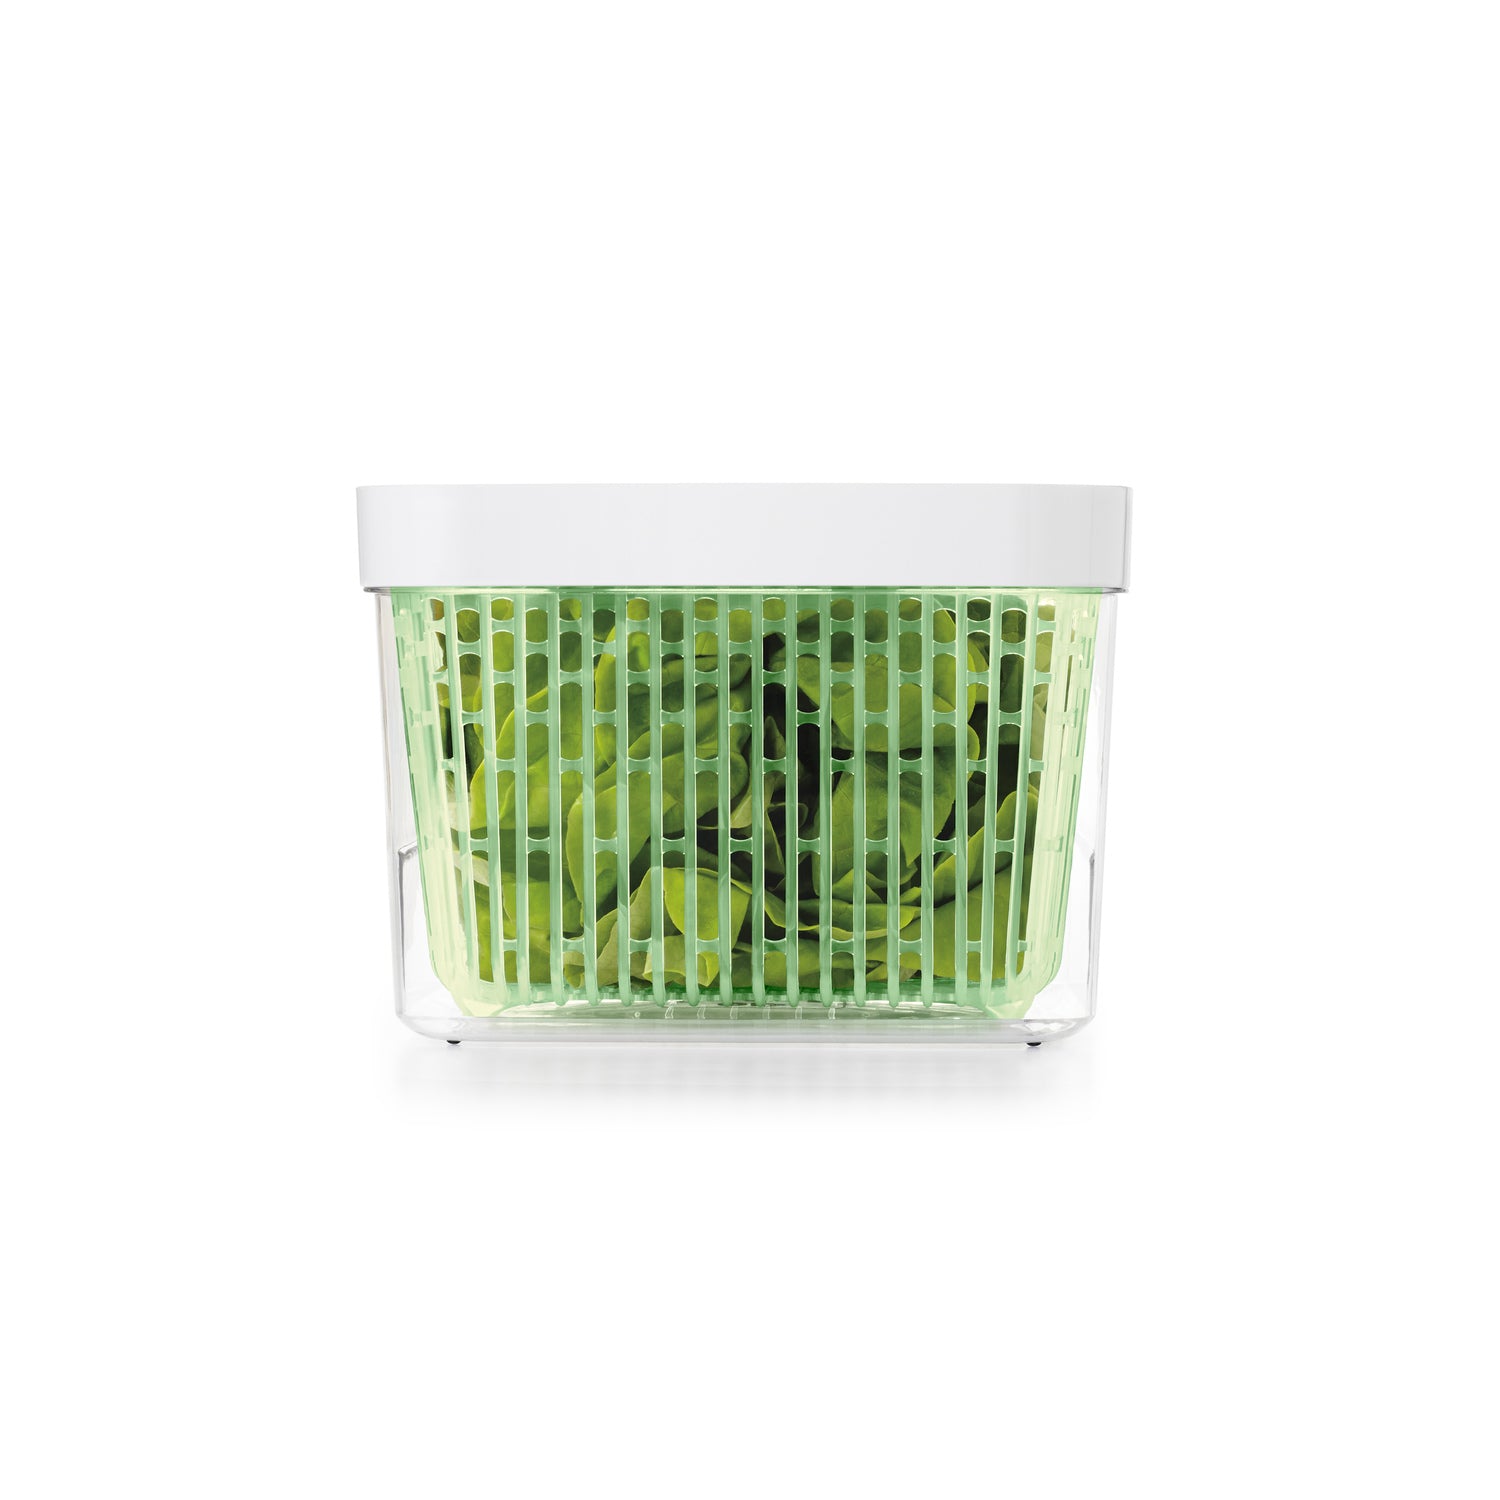 OXO Good Grips GreenSaver Produce Keeper - Large,White